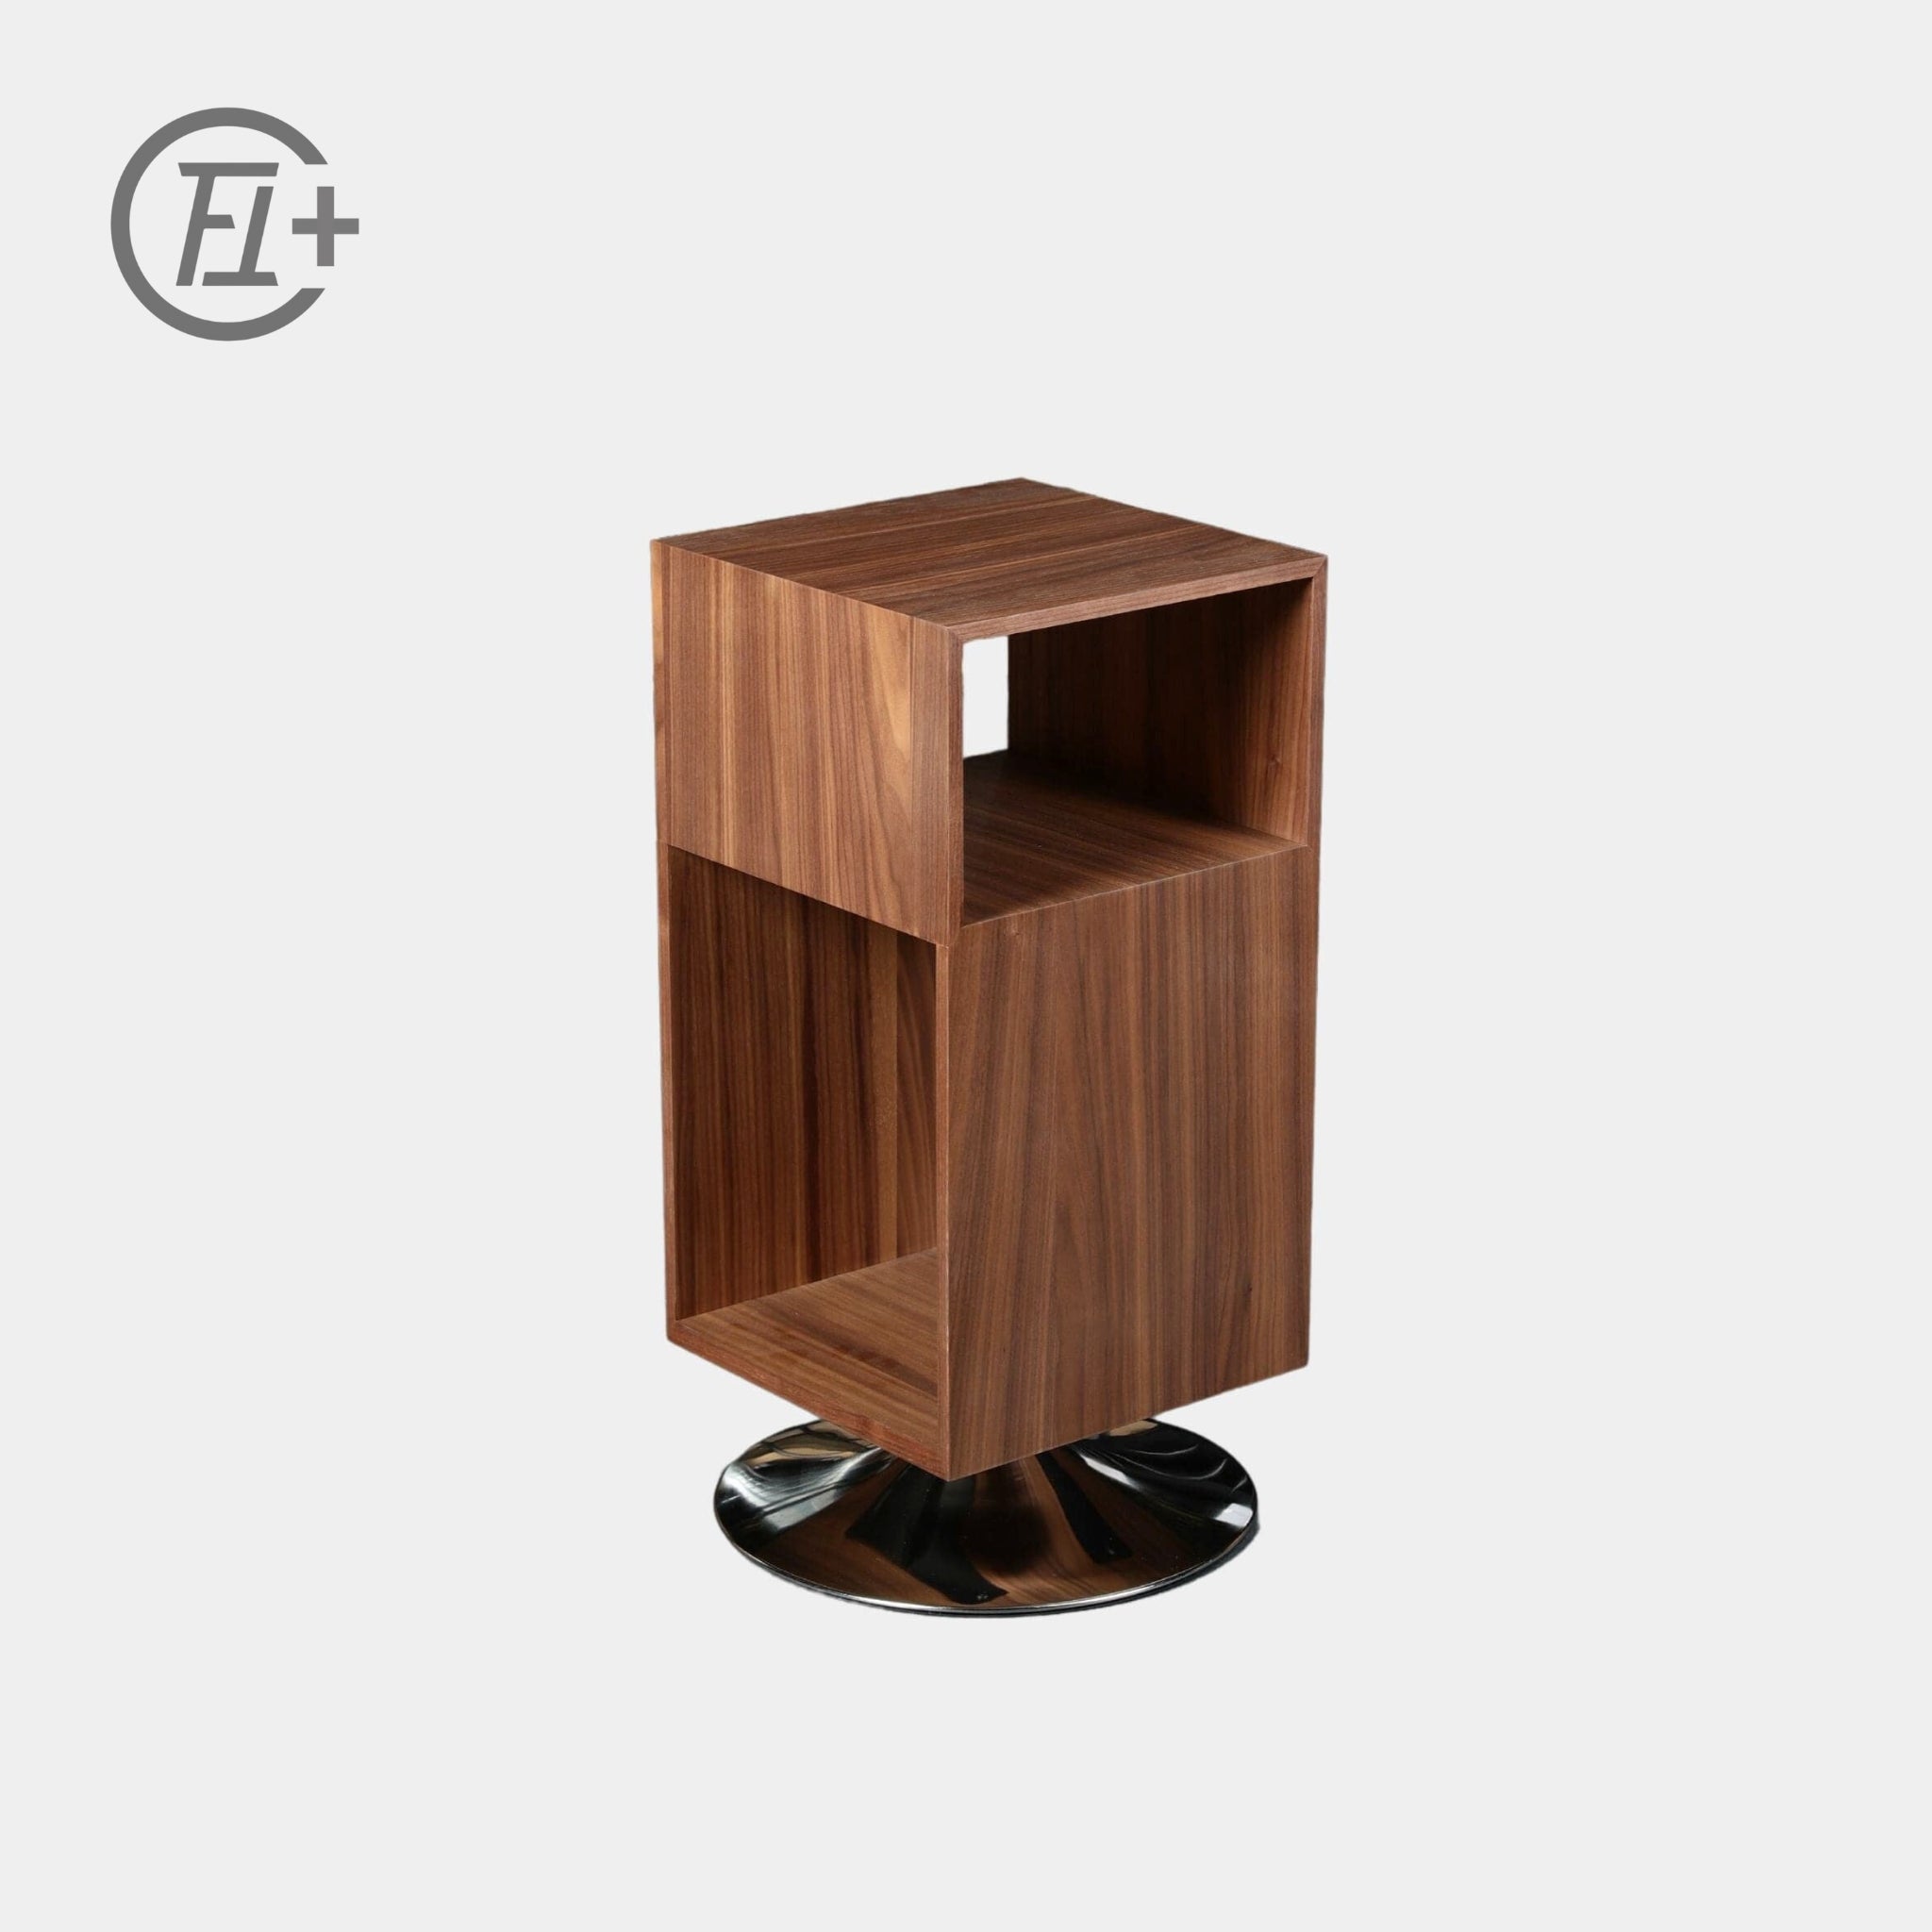 The Feelter Ethereal Side Table